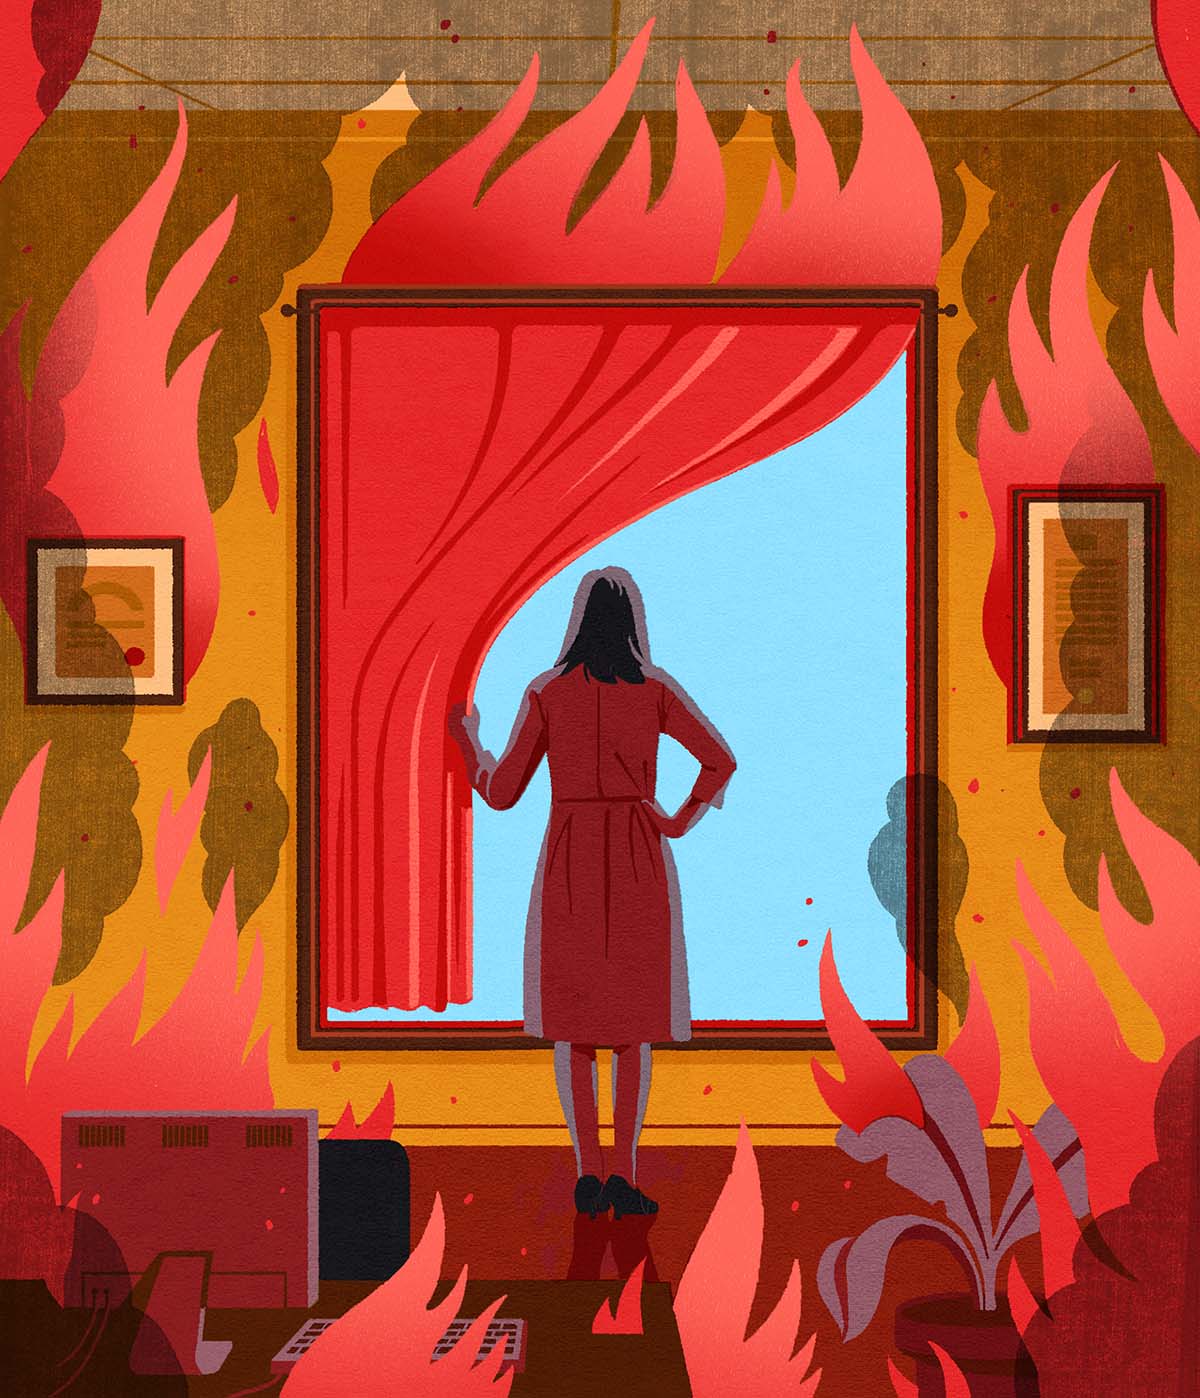 A woman in an burning office looks through a red curtain out the window